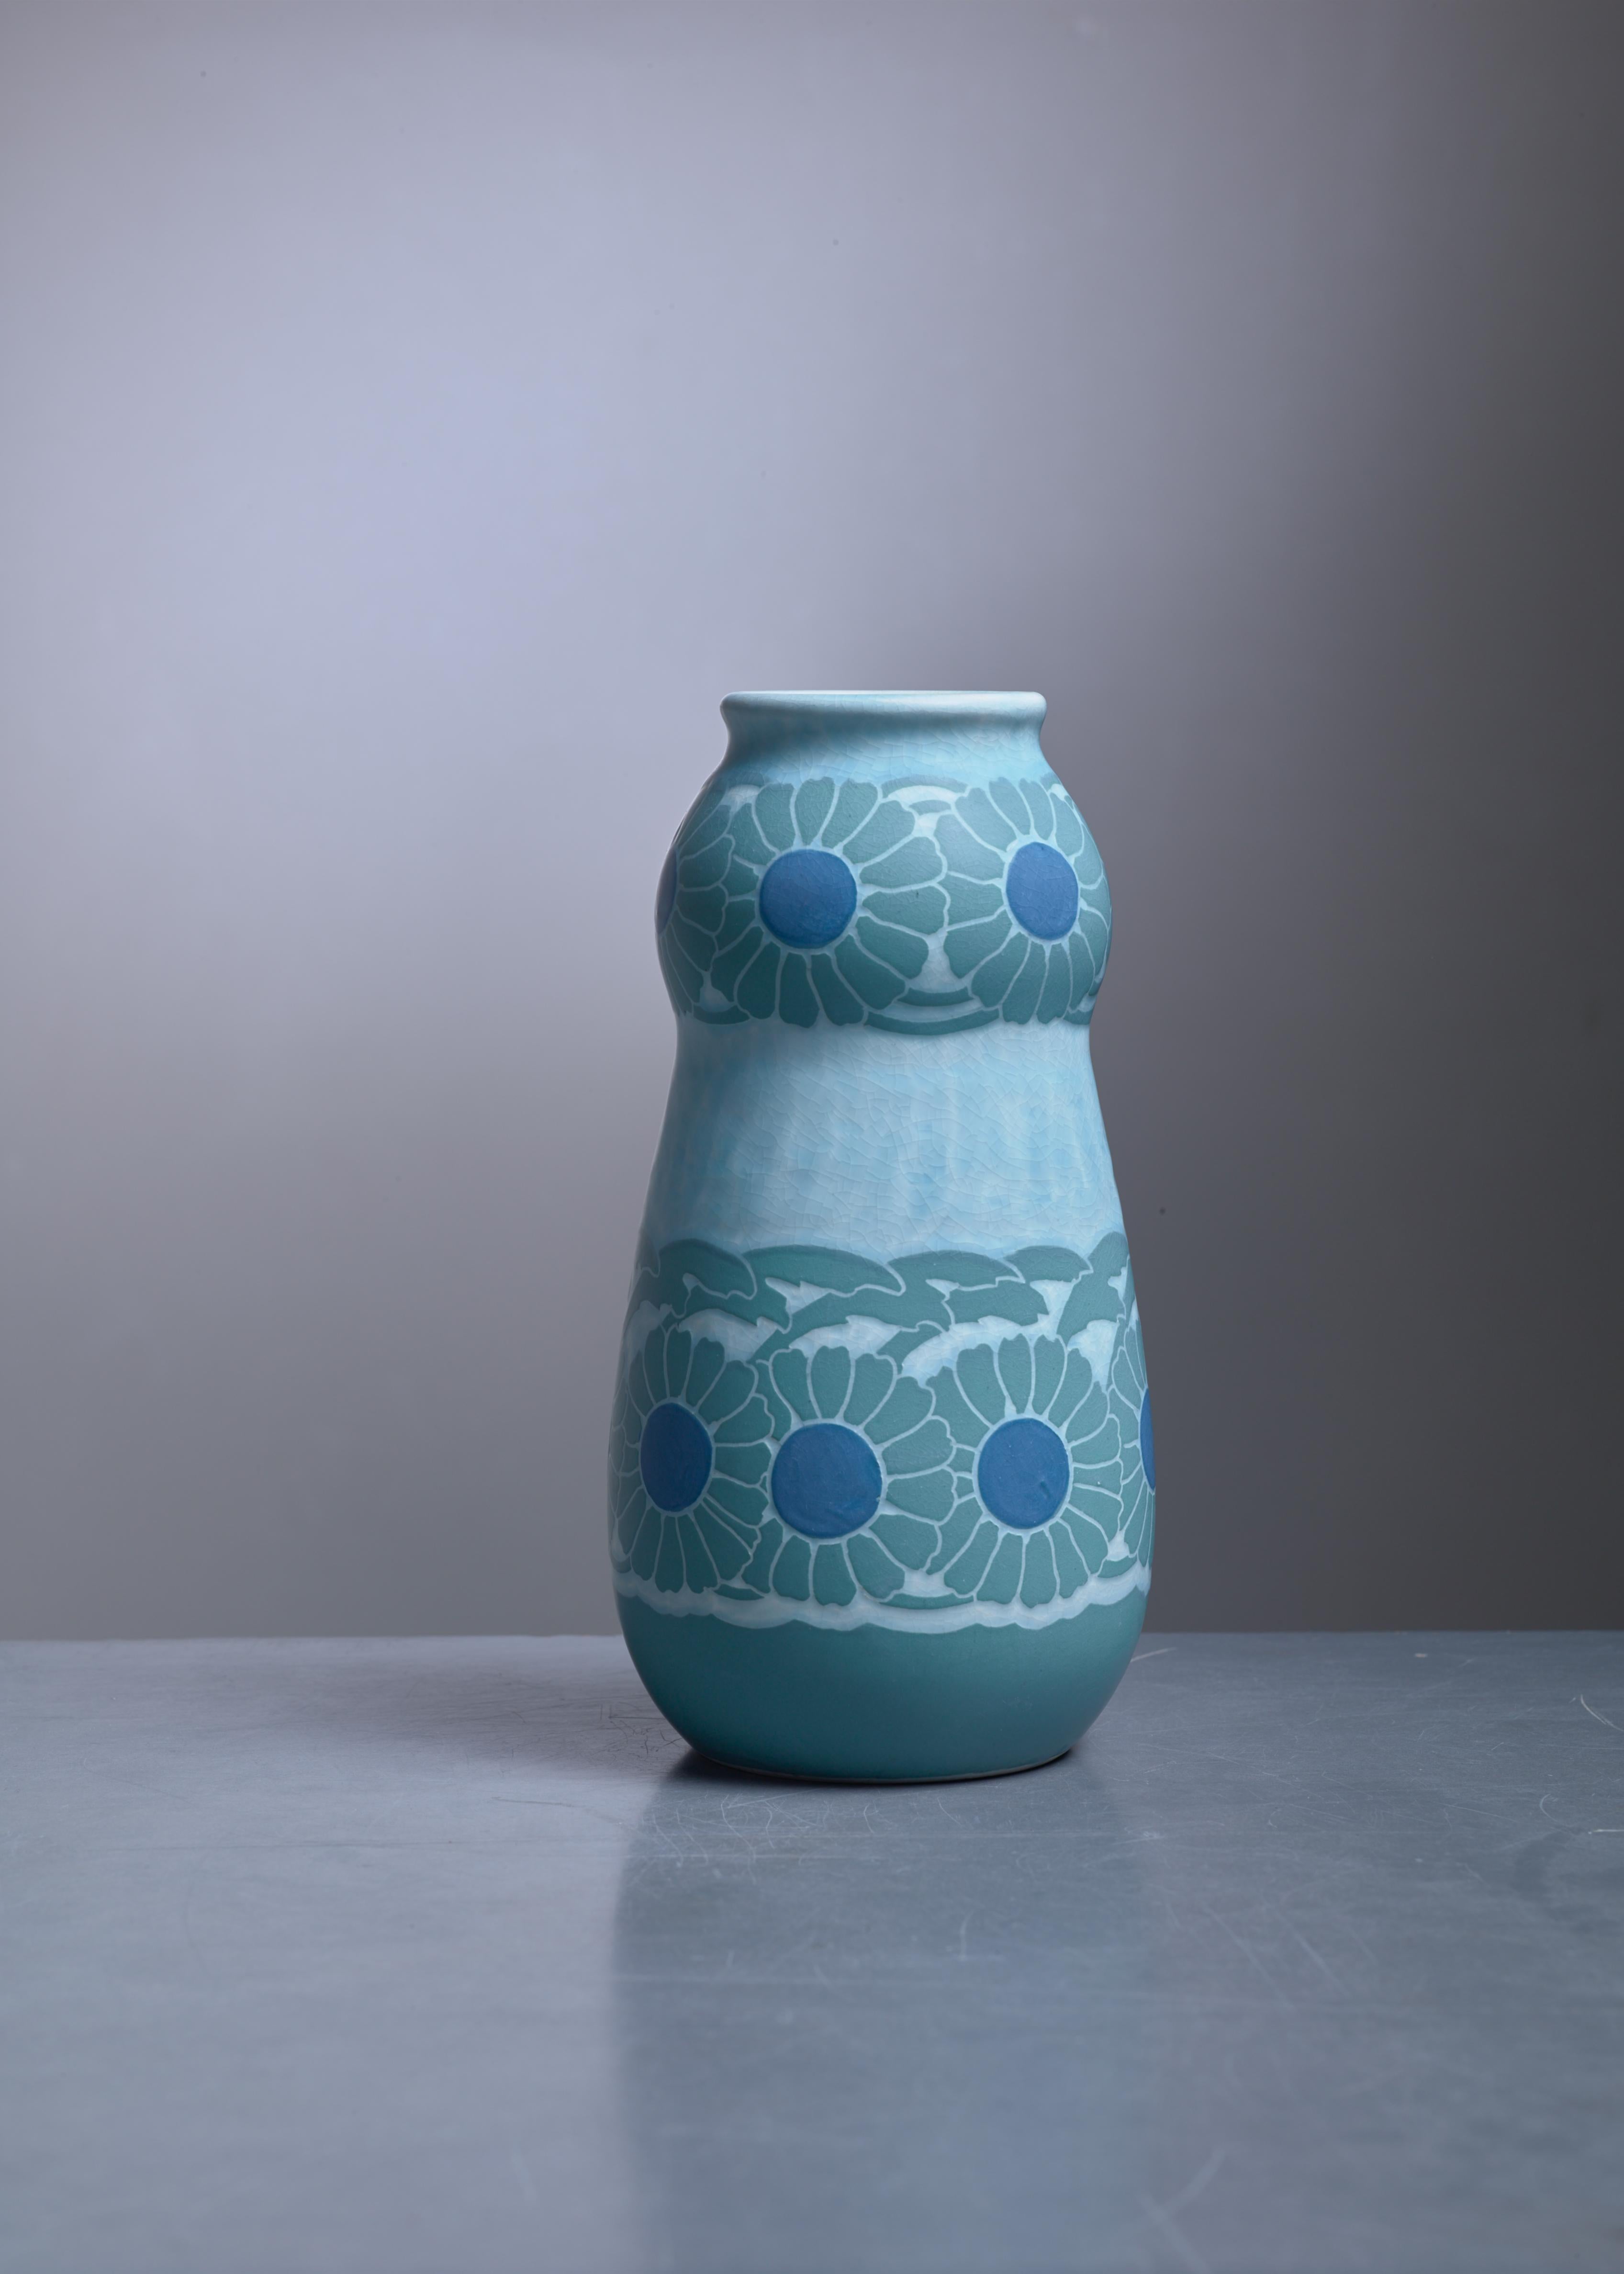 A polychrome sgraffito ceramic vase by Josef Ekberg for Gustavsberg.
Signed by Ekberg with the year of production (1910).

